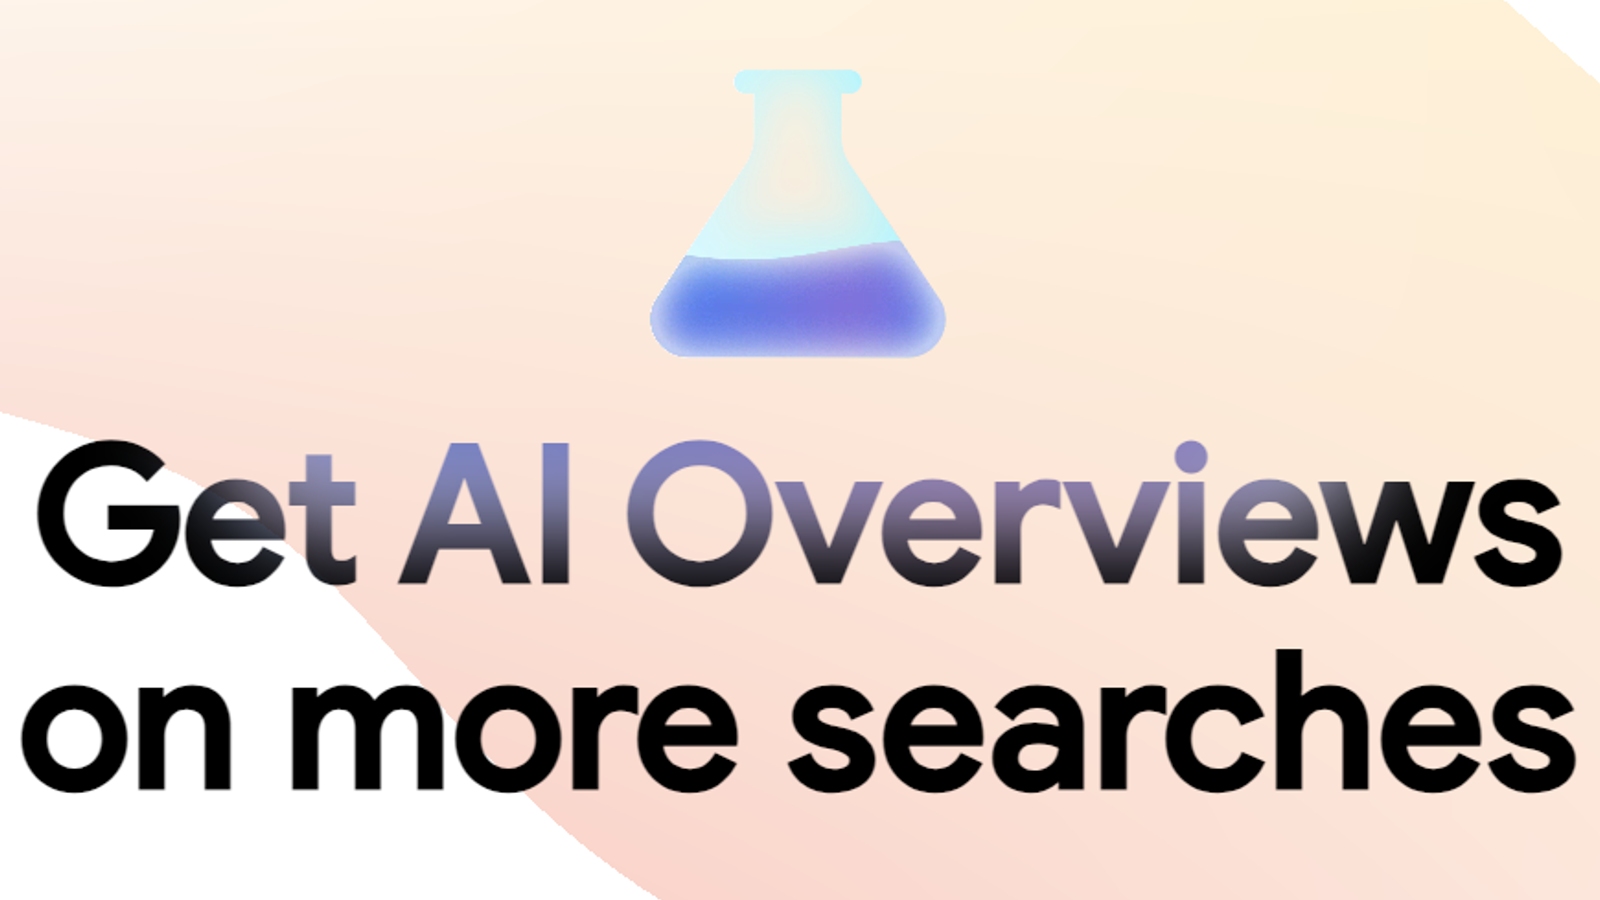 AI Overviews in Google Search